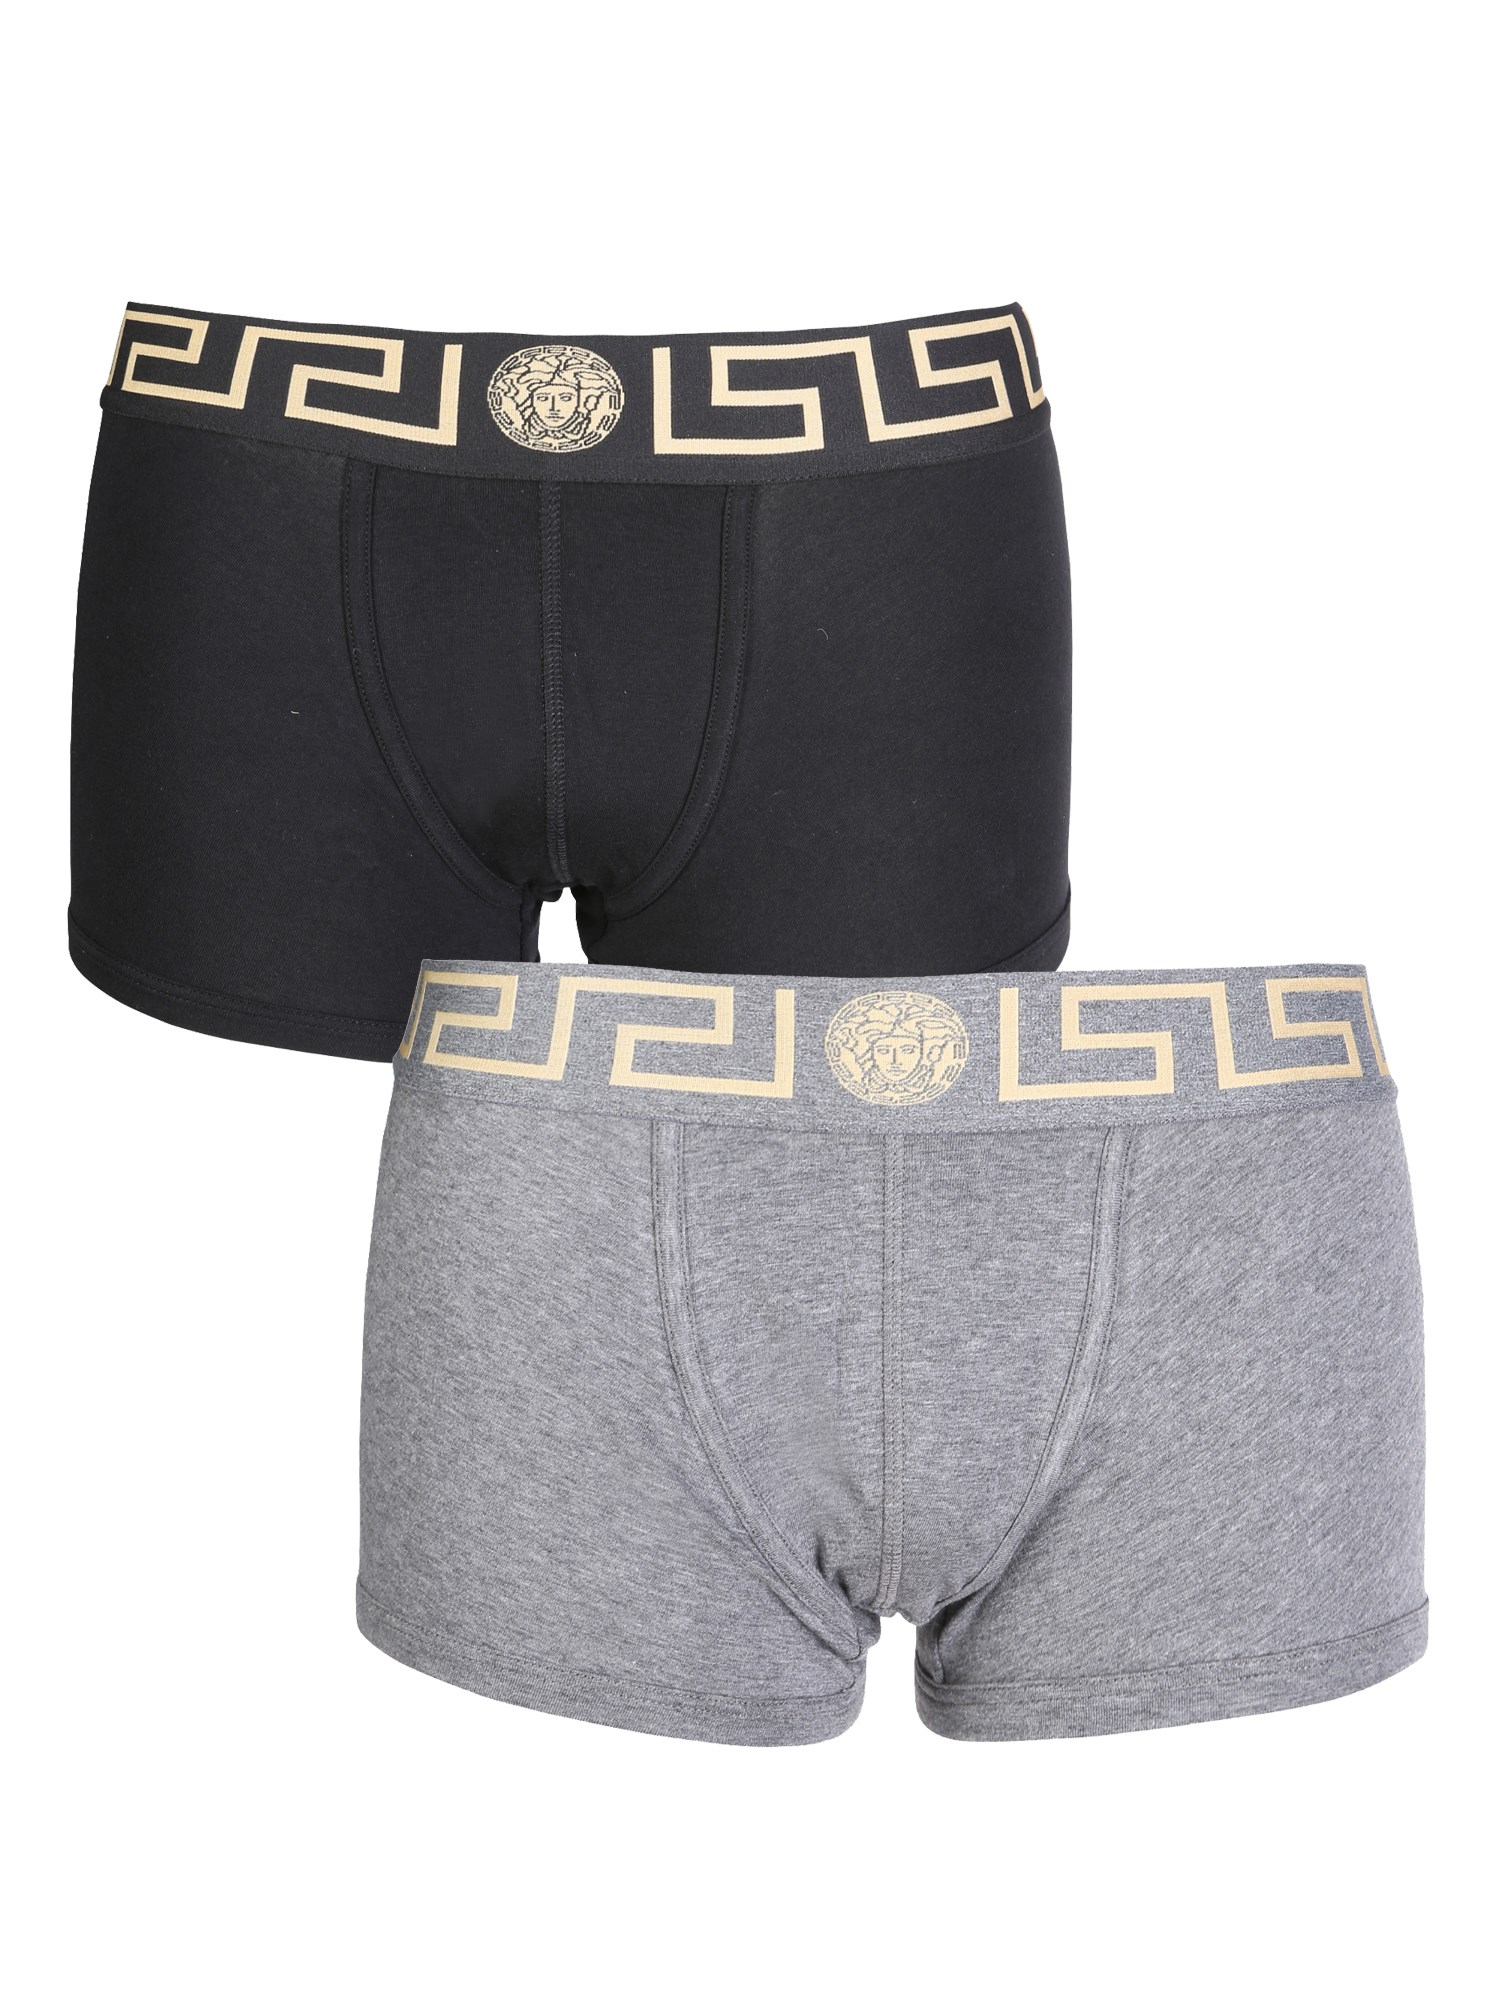 versace pack of two boxers with greek